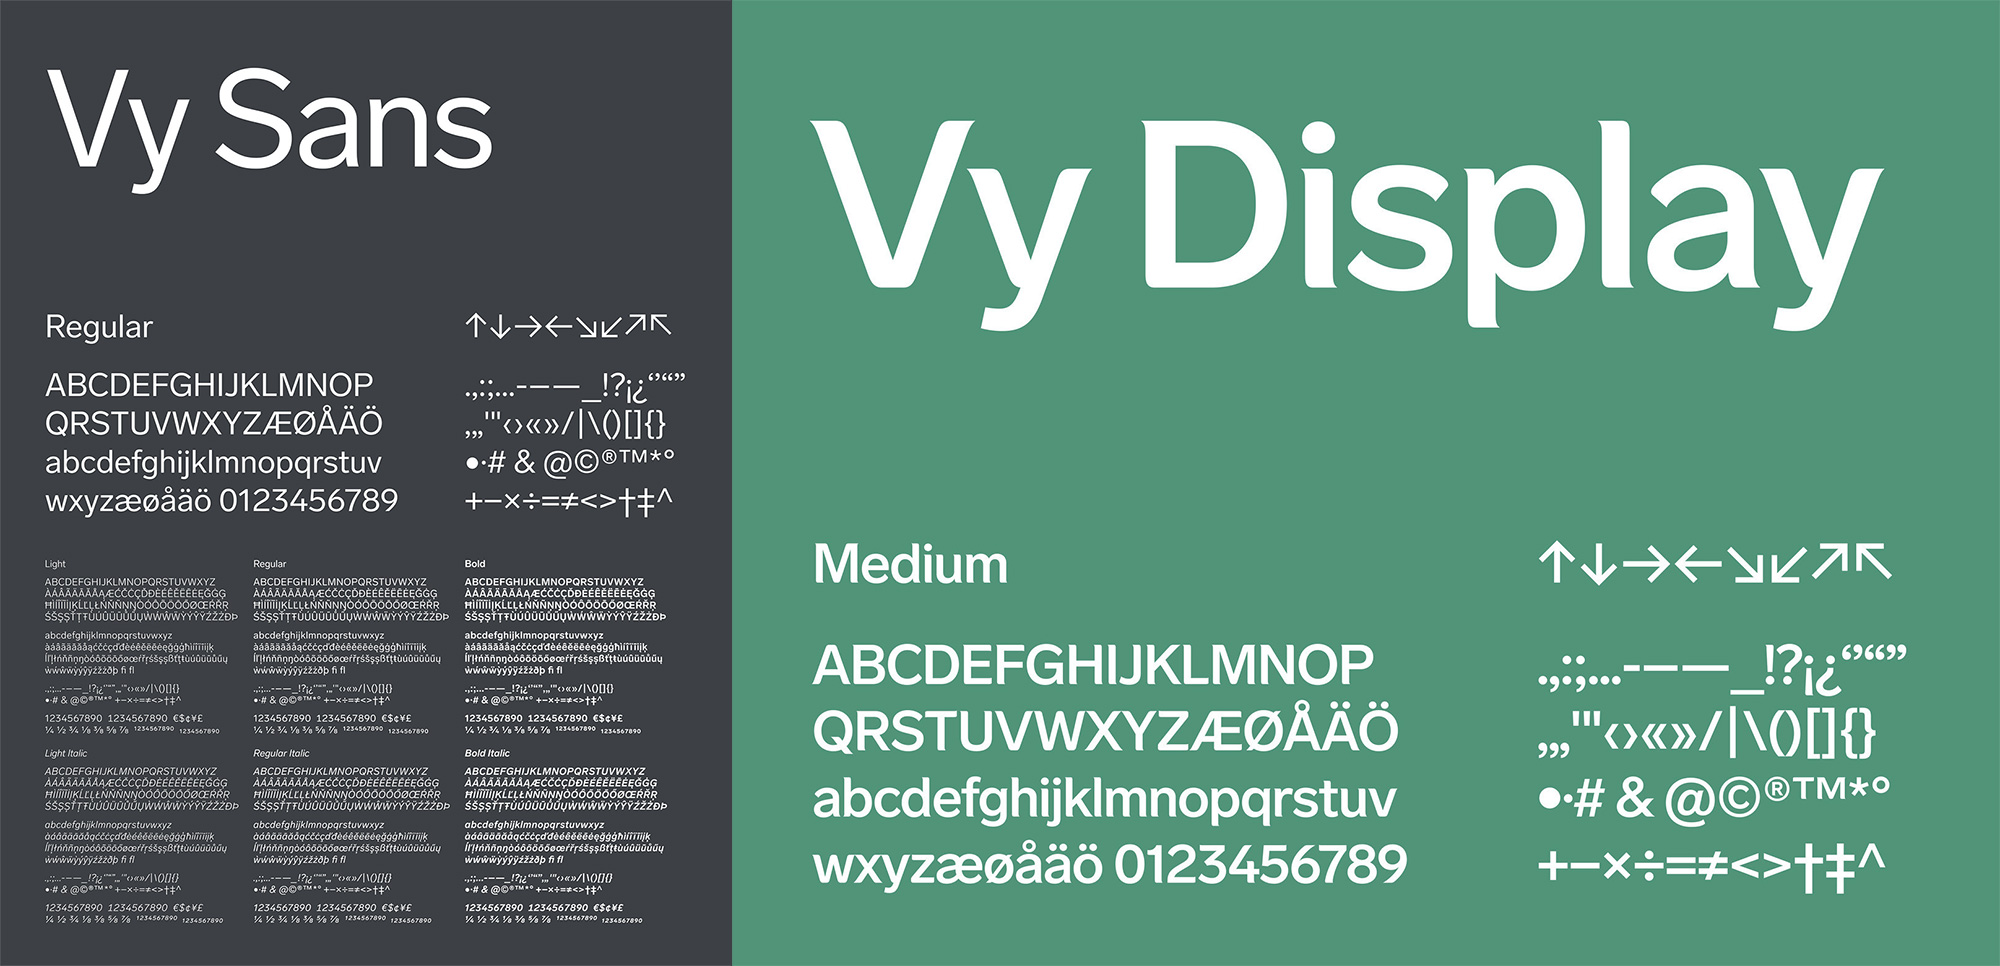 New Logo and Identity for Vy by Snøhetta